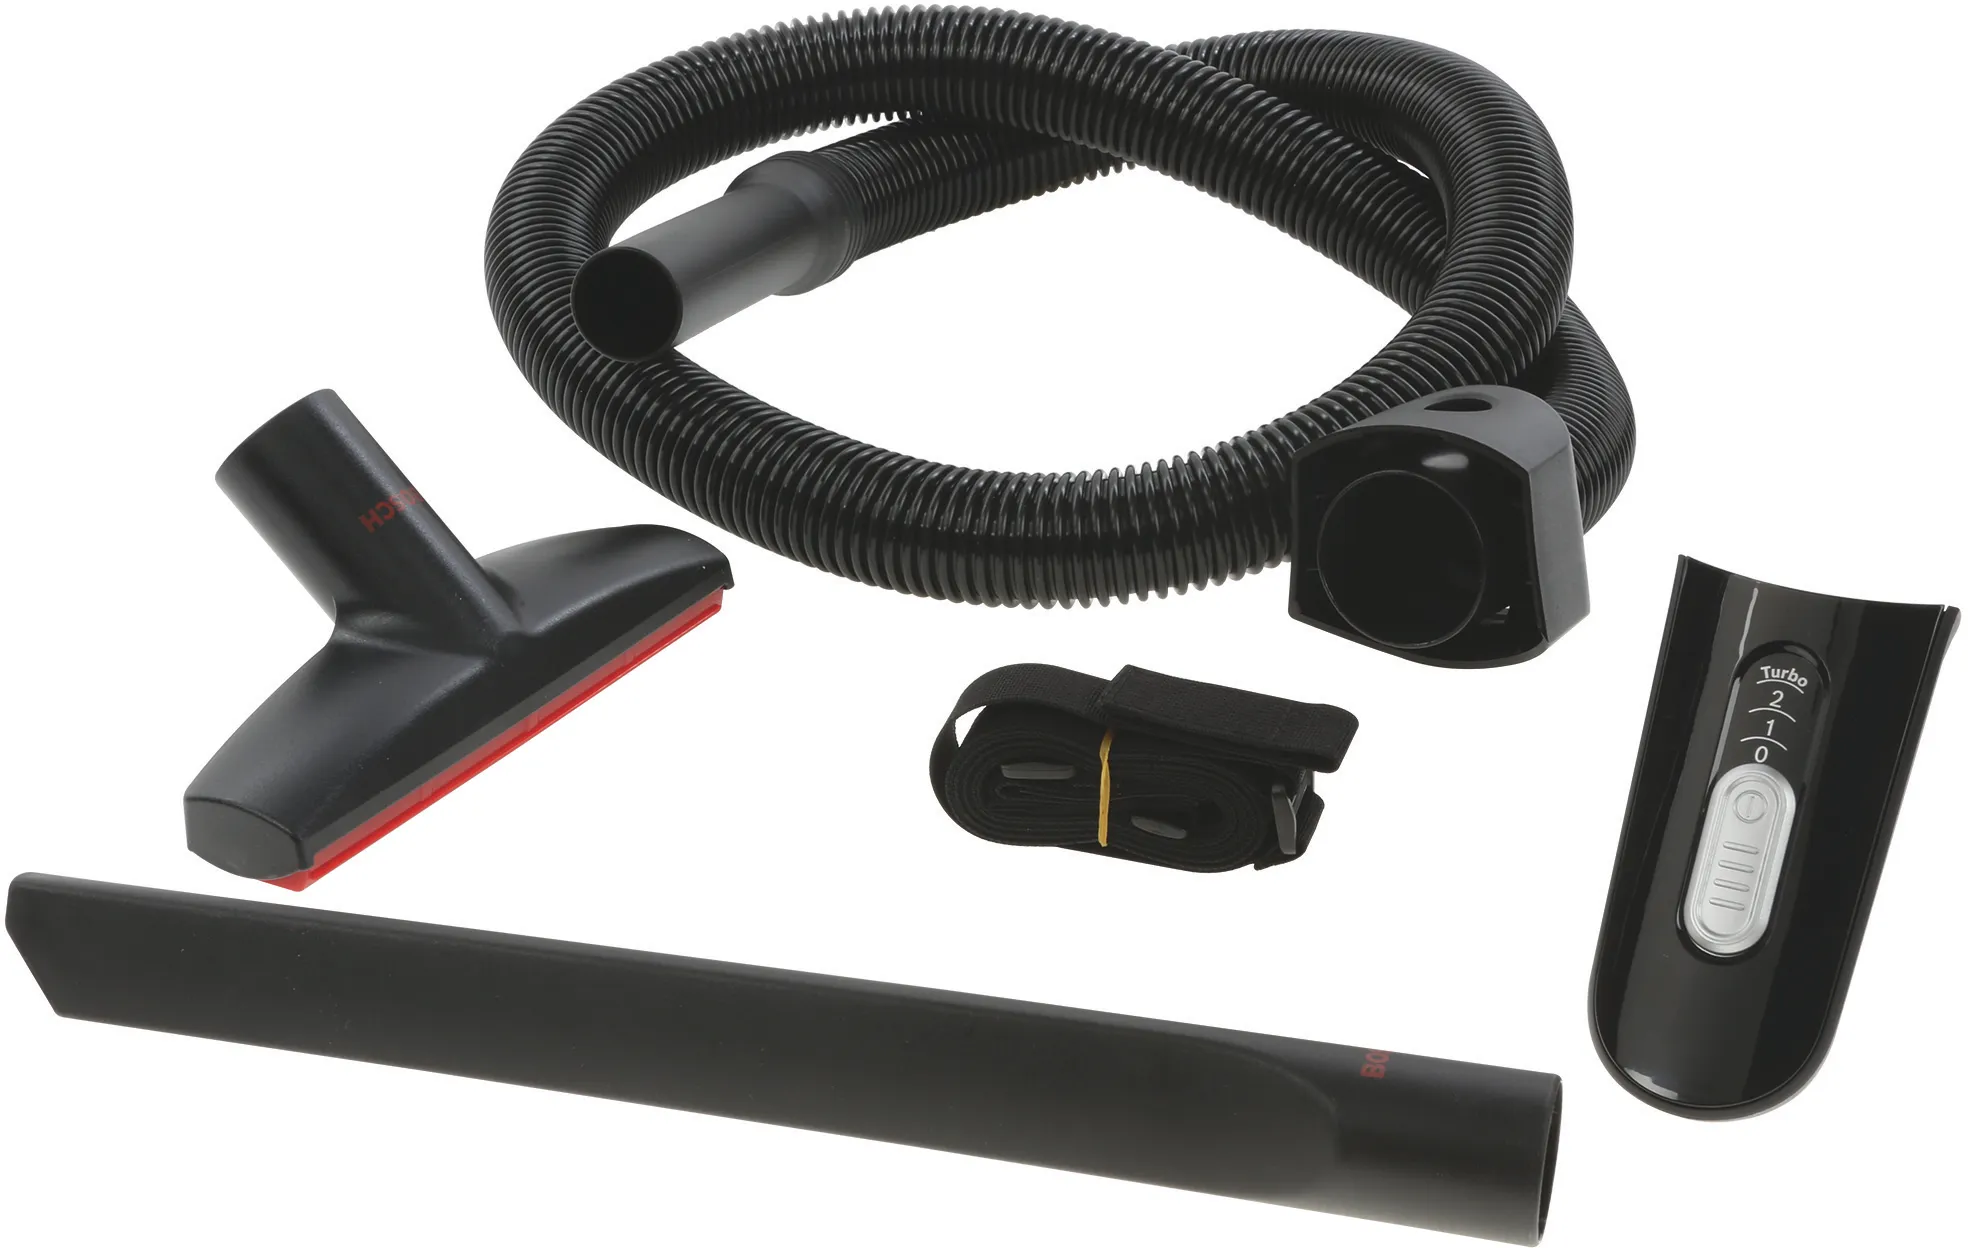 Accessory set Accessory set for Athlet vacuum cleaner 